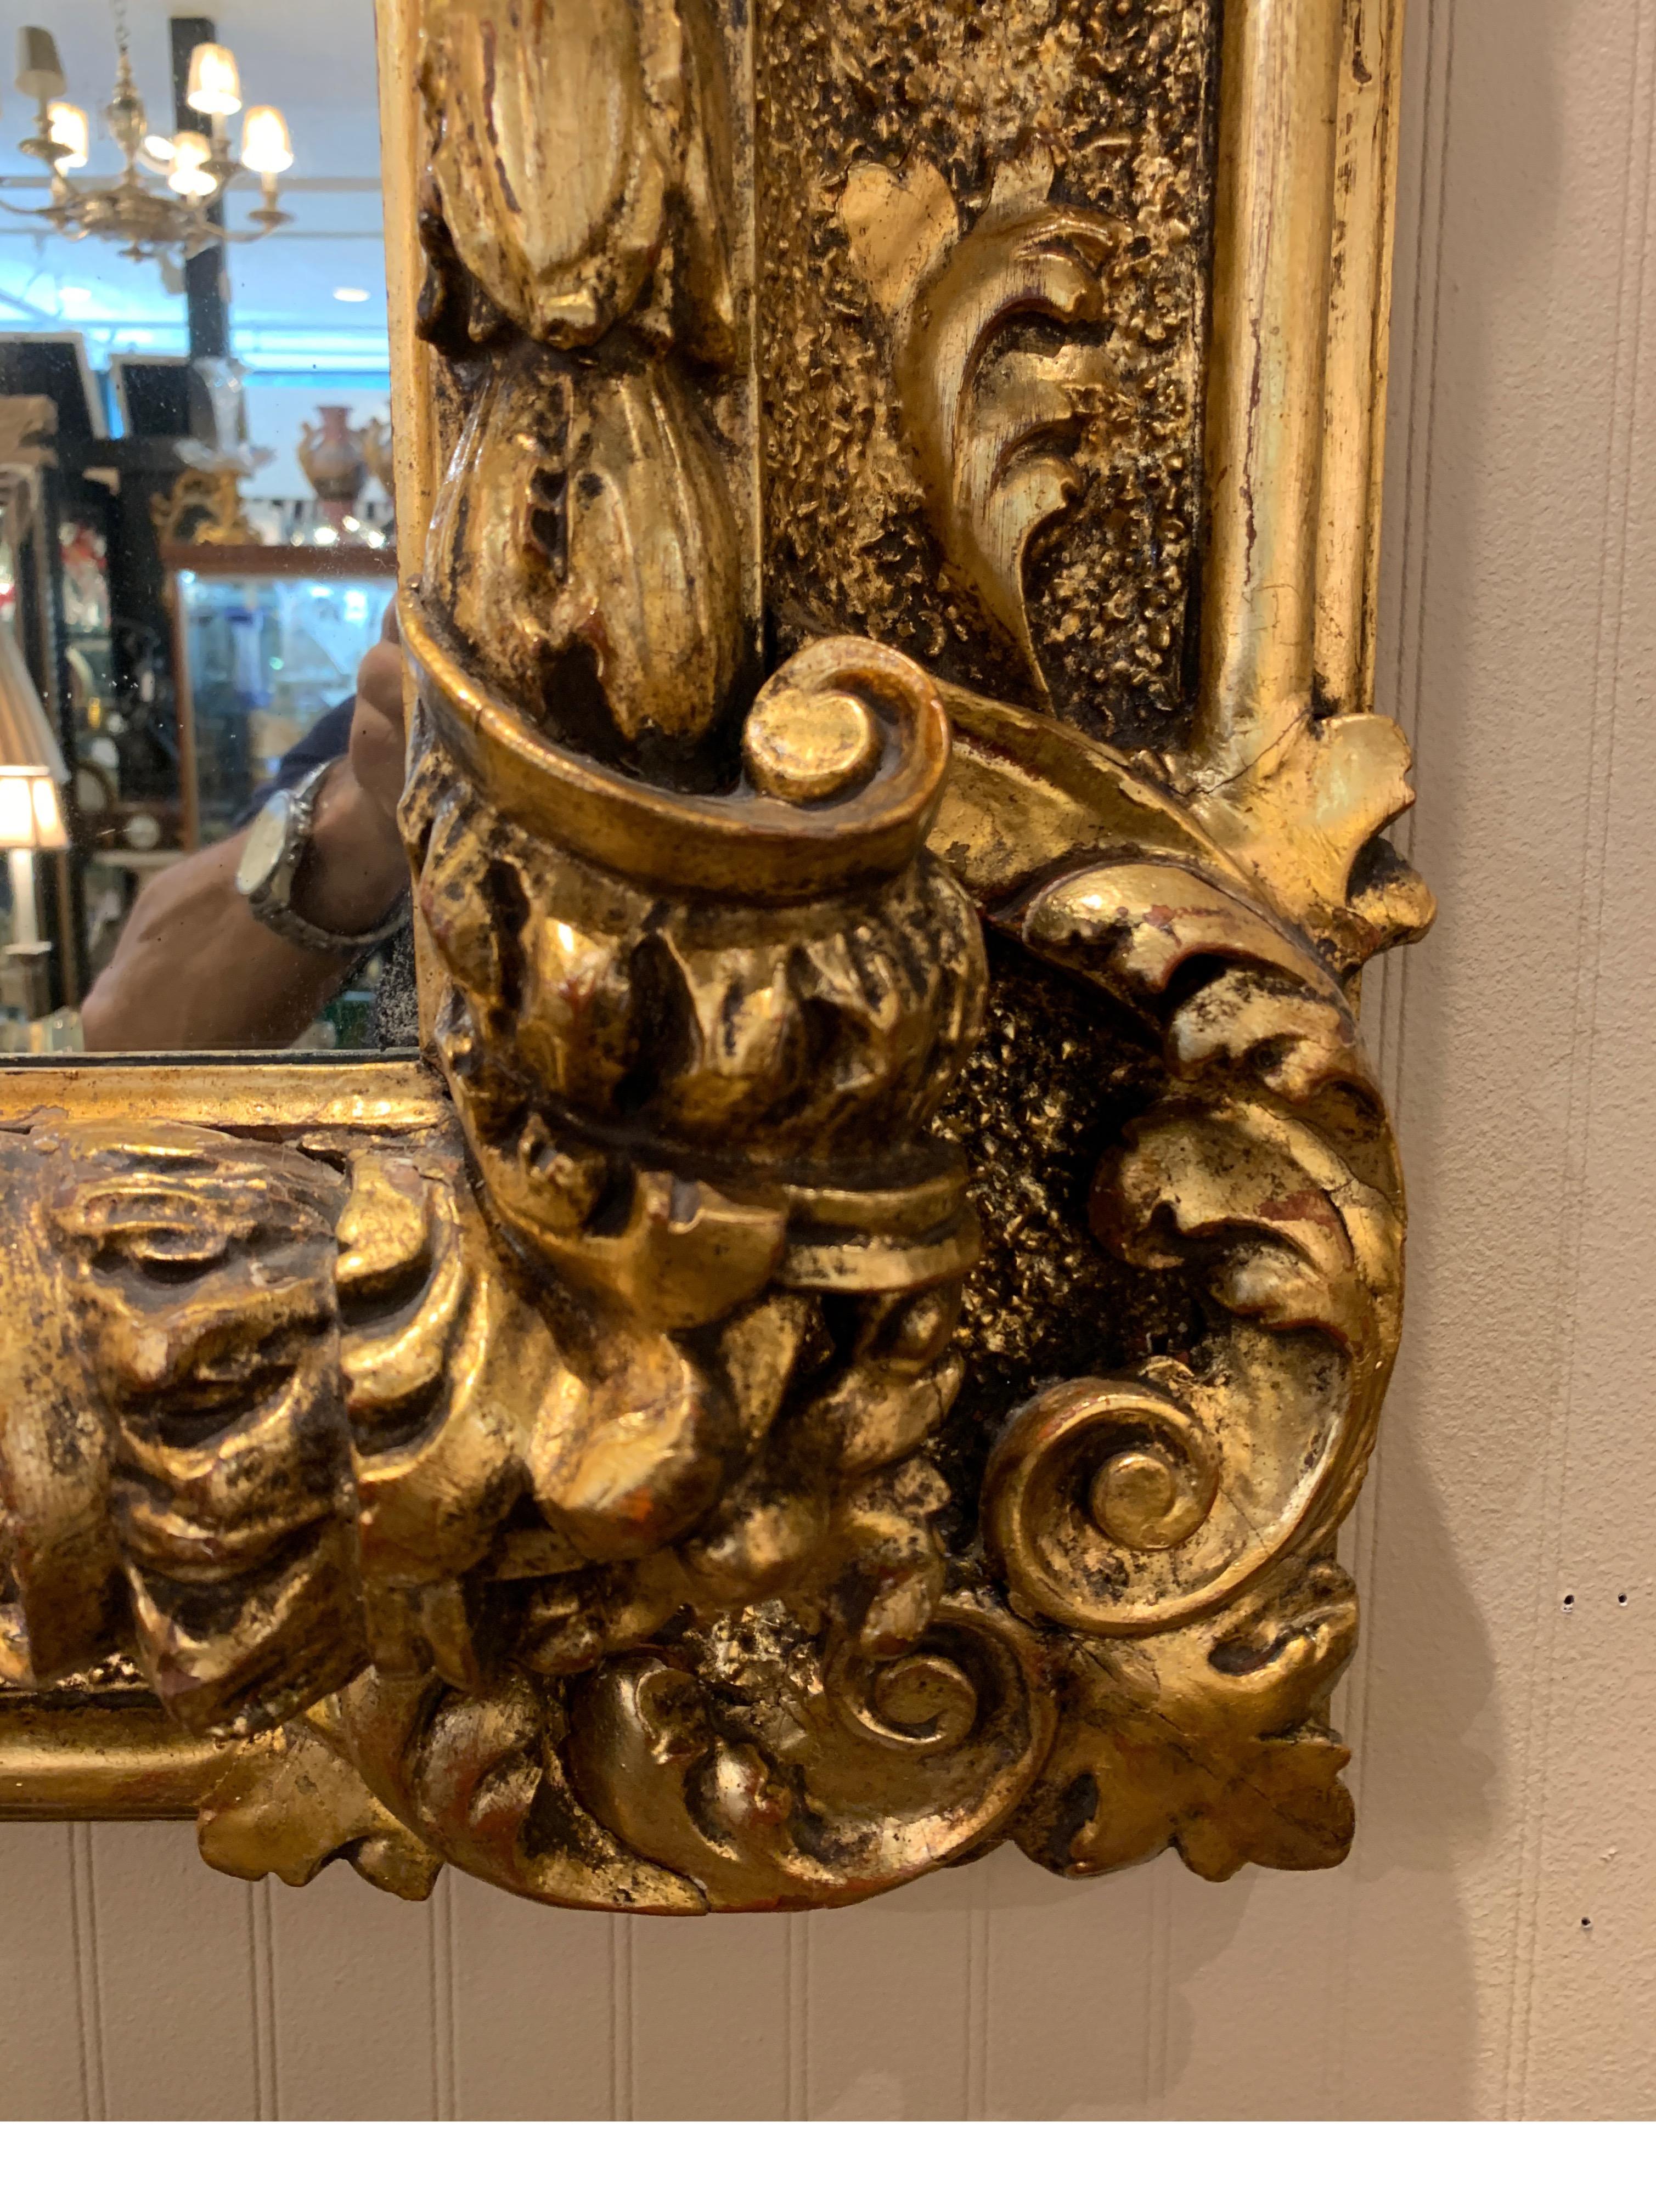 European 1840-1850 Monumental Antique Ornate Hand Carved Gold Gilt and Gesso Mirror